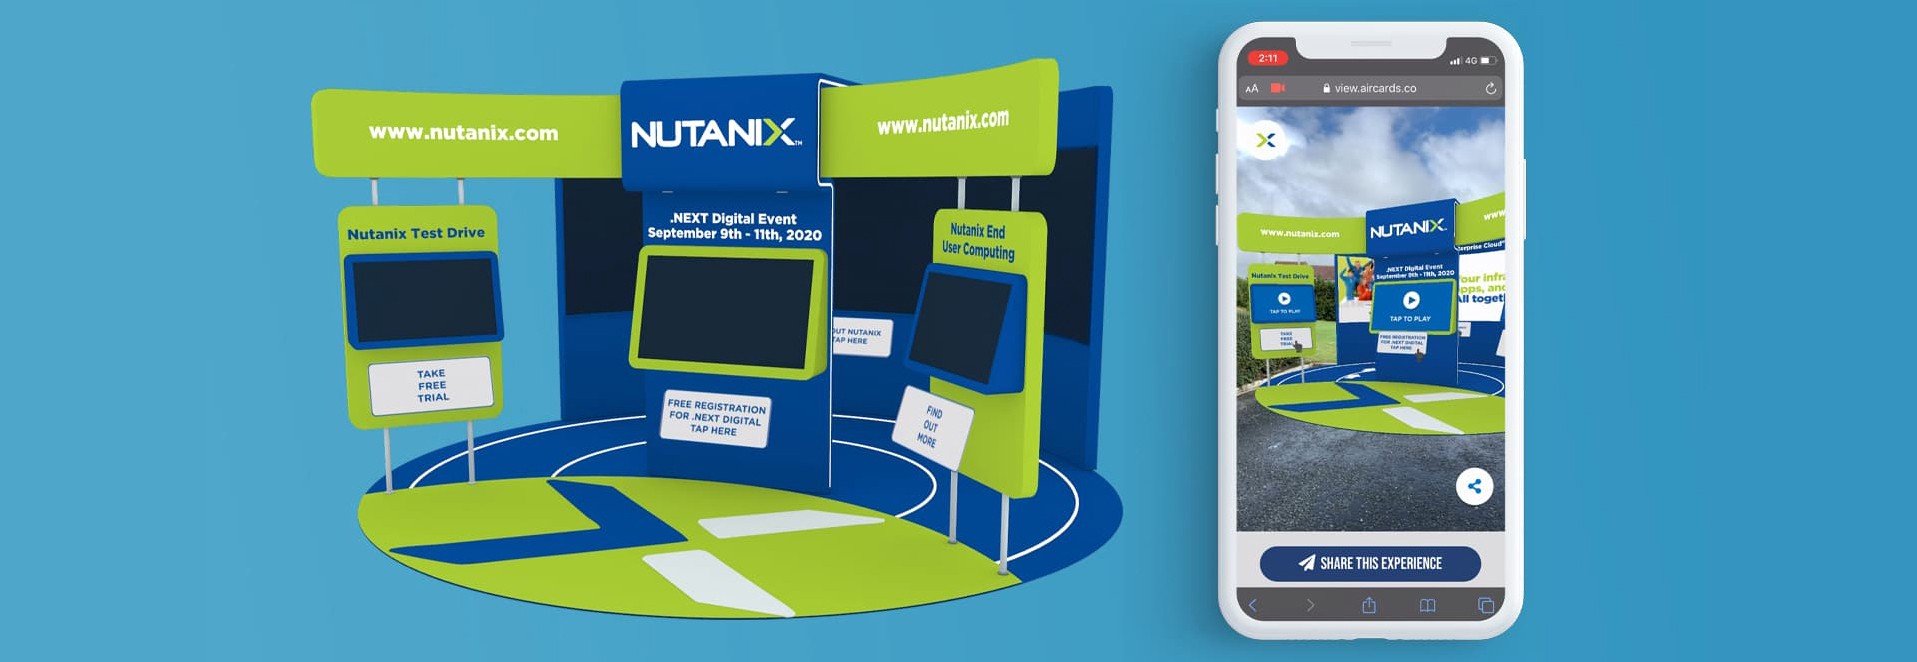 Aircards teams up with Dubai-based partner CXO Strategies to deliver an entirely virtual expo experience for Nutanix